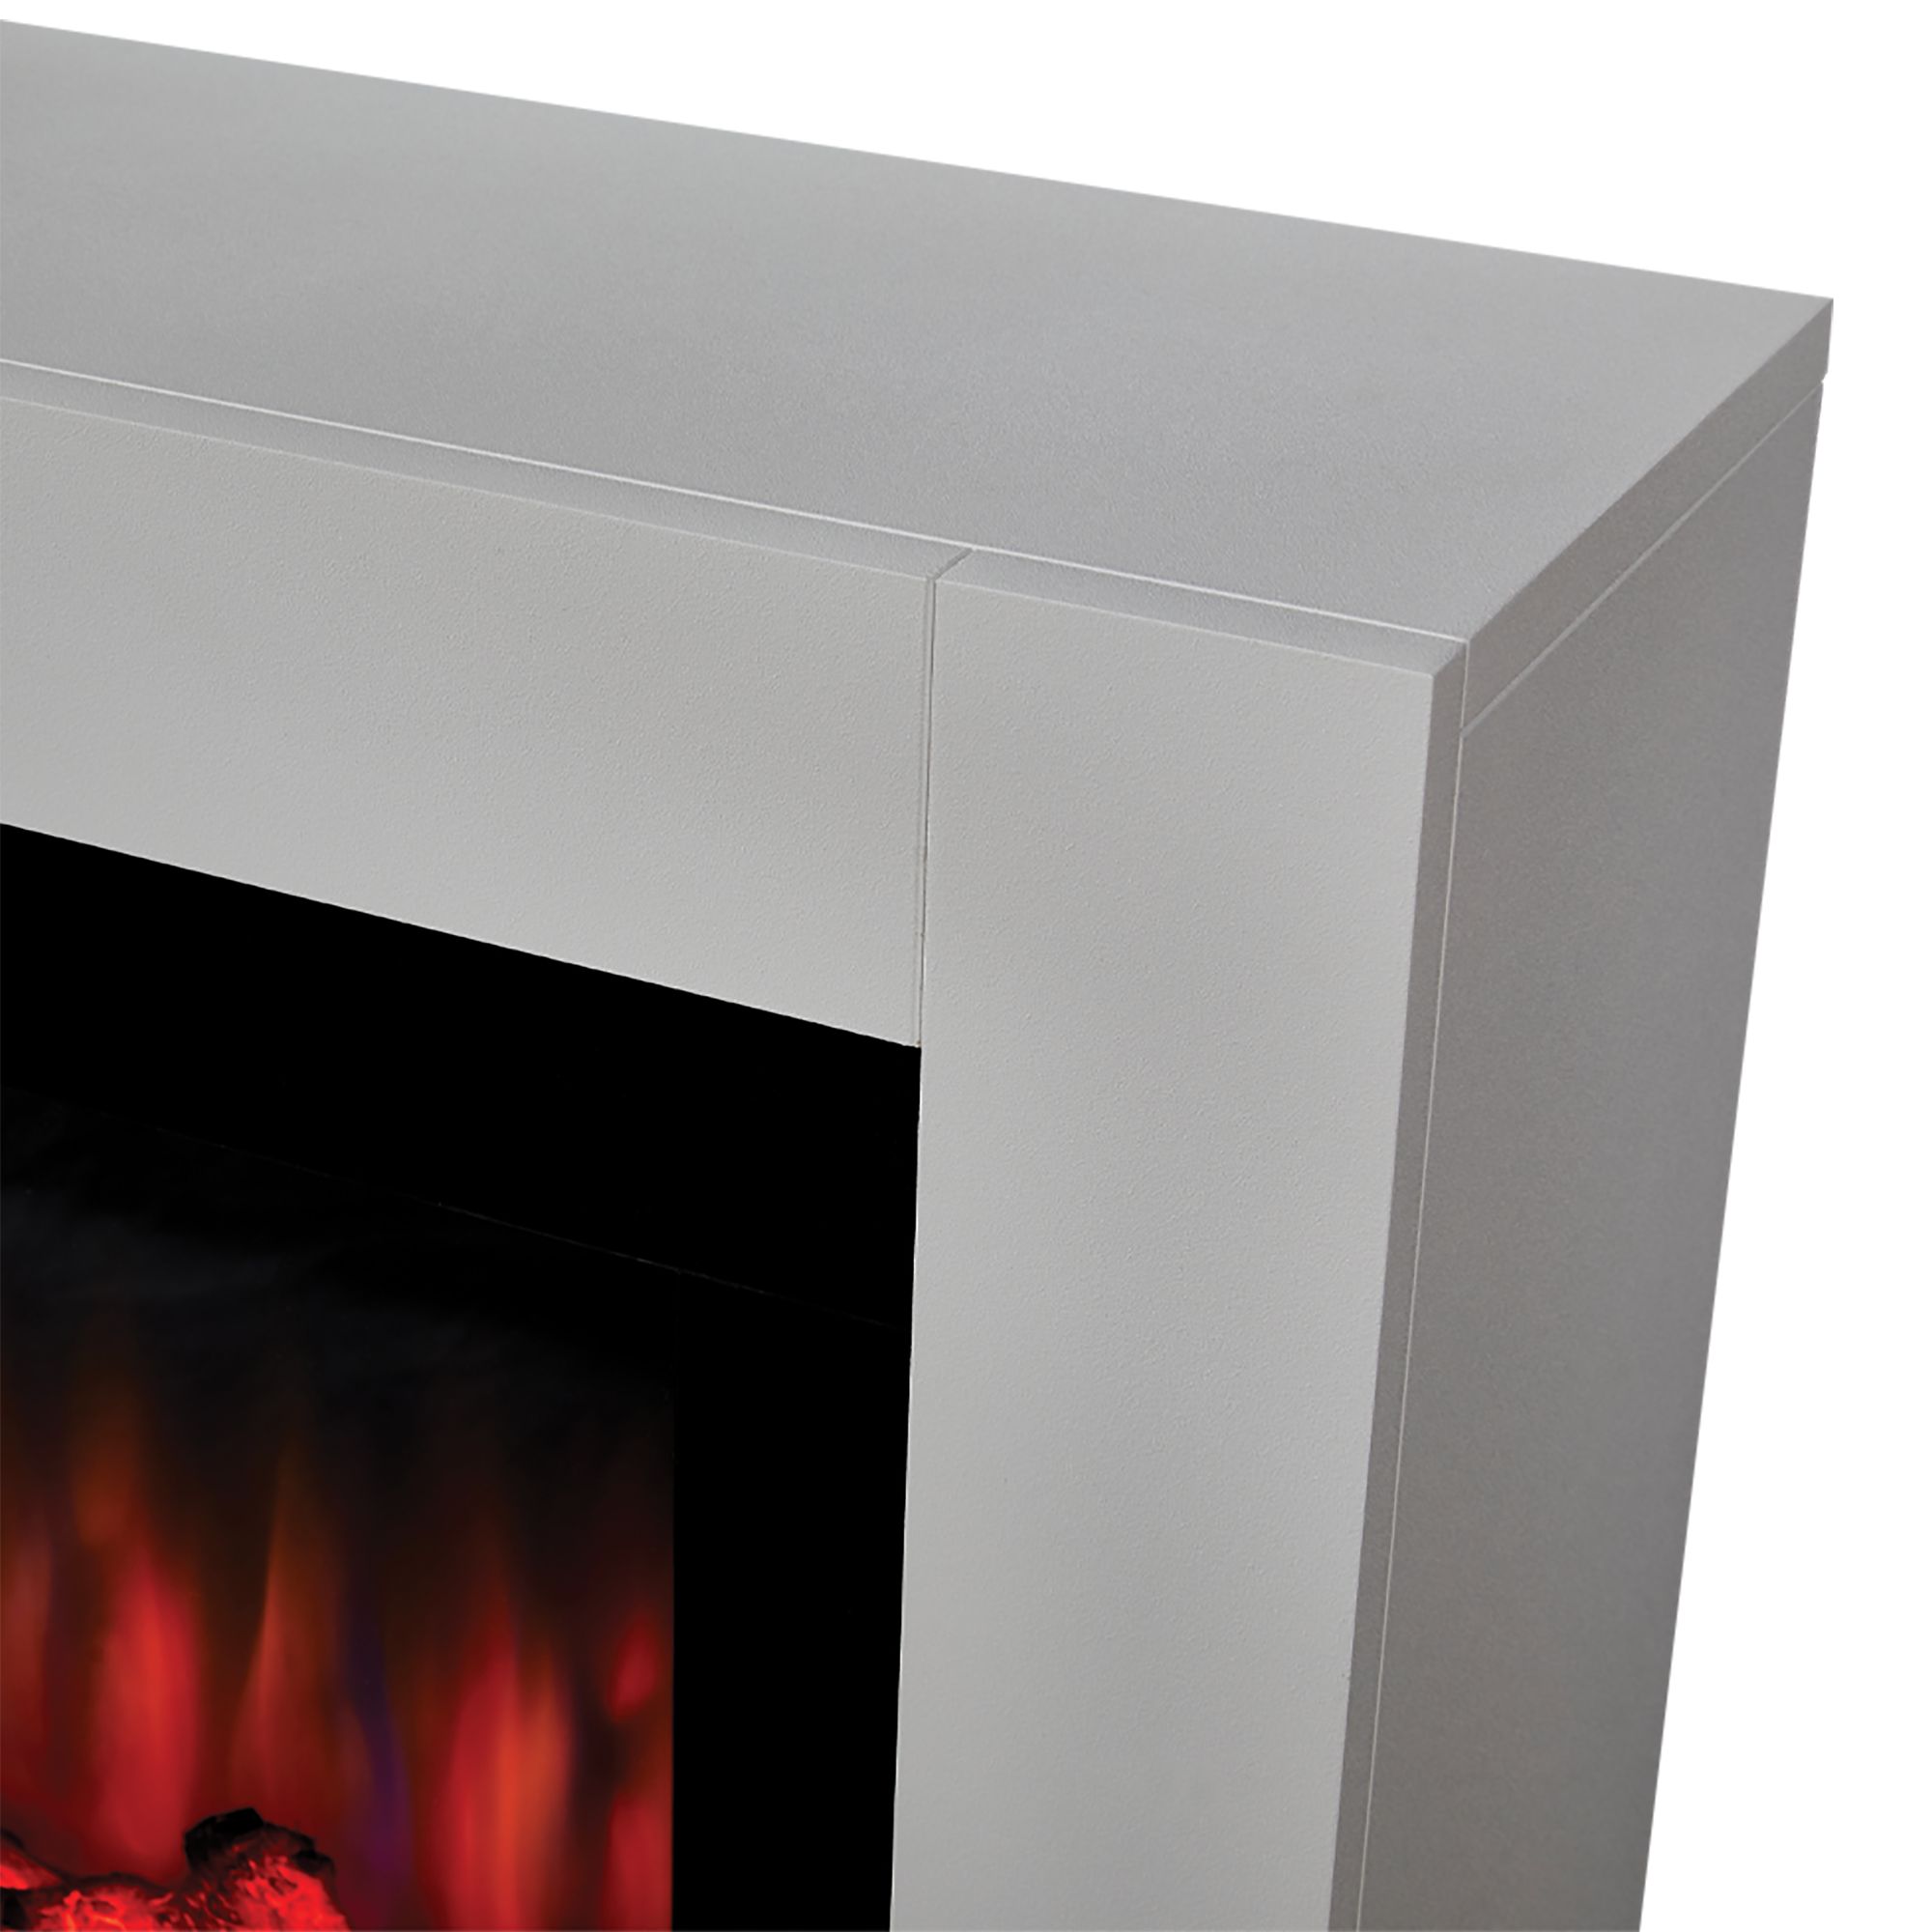 Suncrest Lumley White MDF & stainless steel Freestanding Electric fire suite